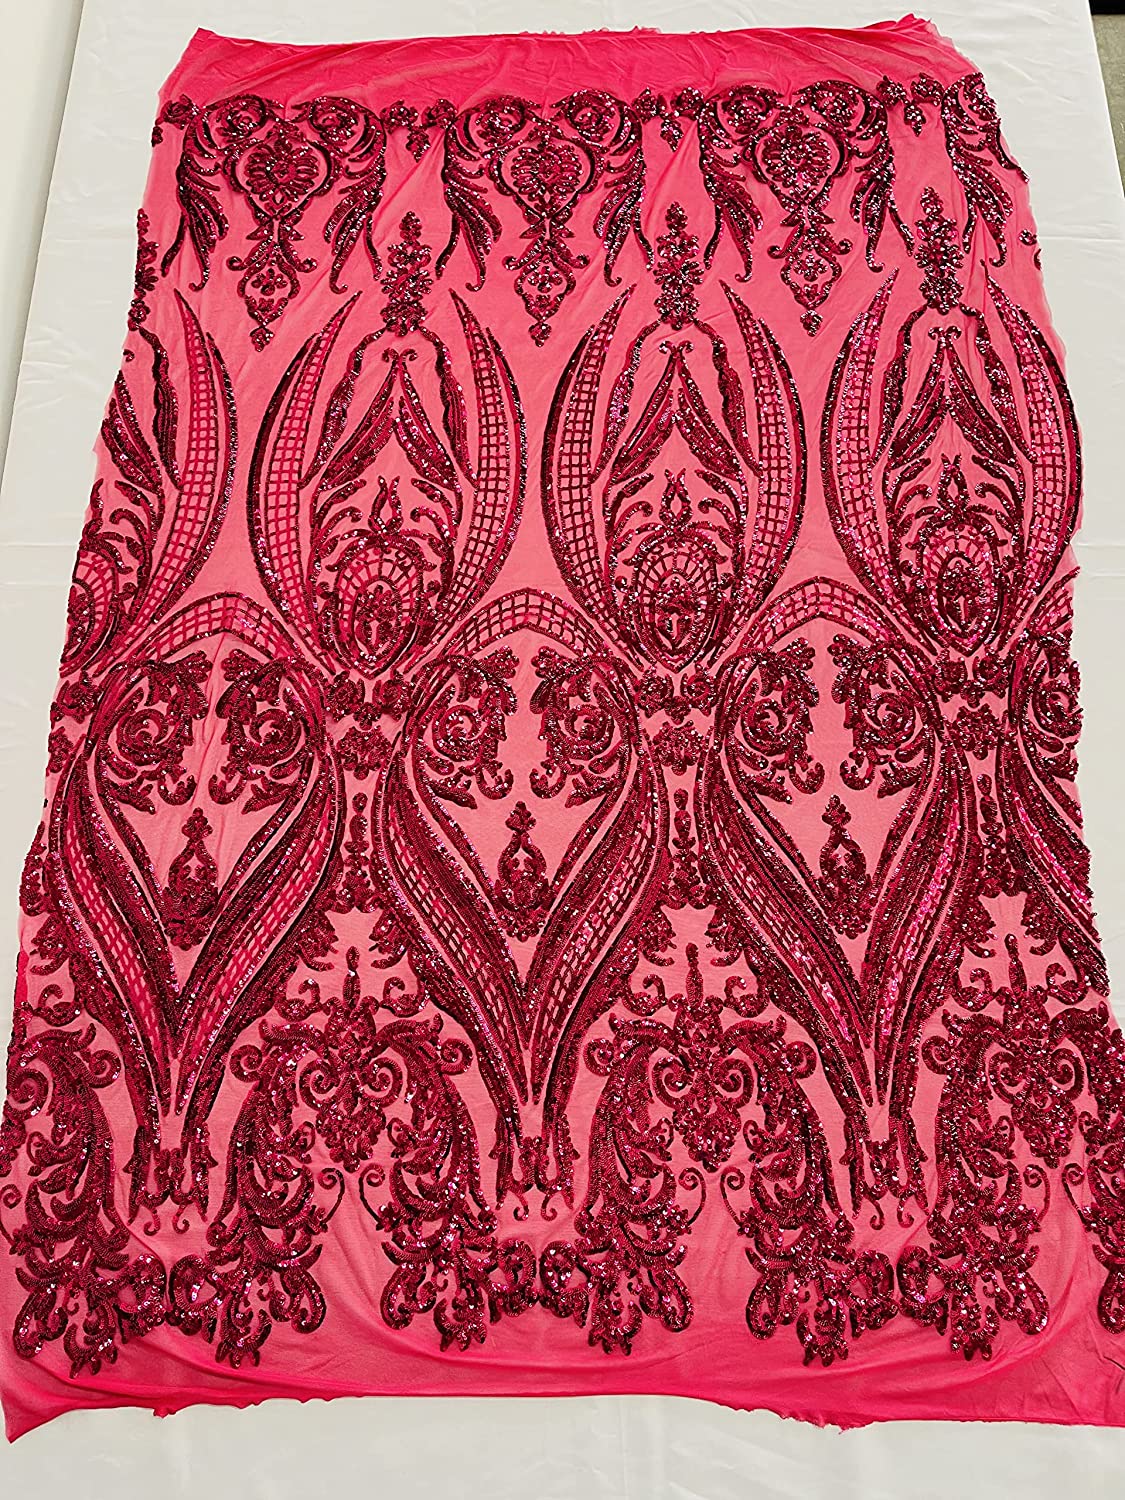 Empire Damask Design with Sequins Embroider On A 4 Way Stretch Mesh Fabric (1 Yard, Fuchsia)